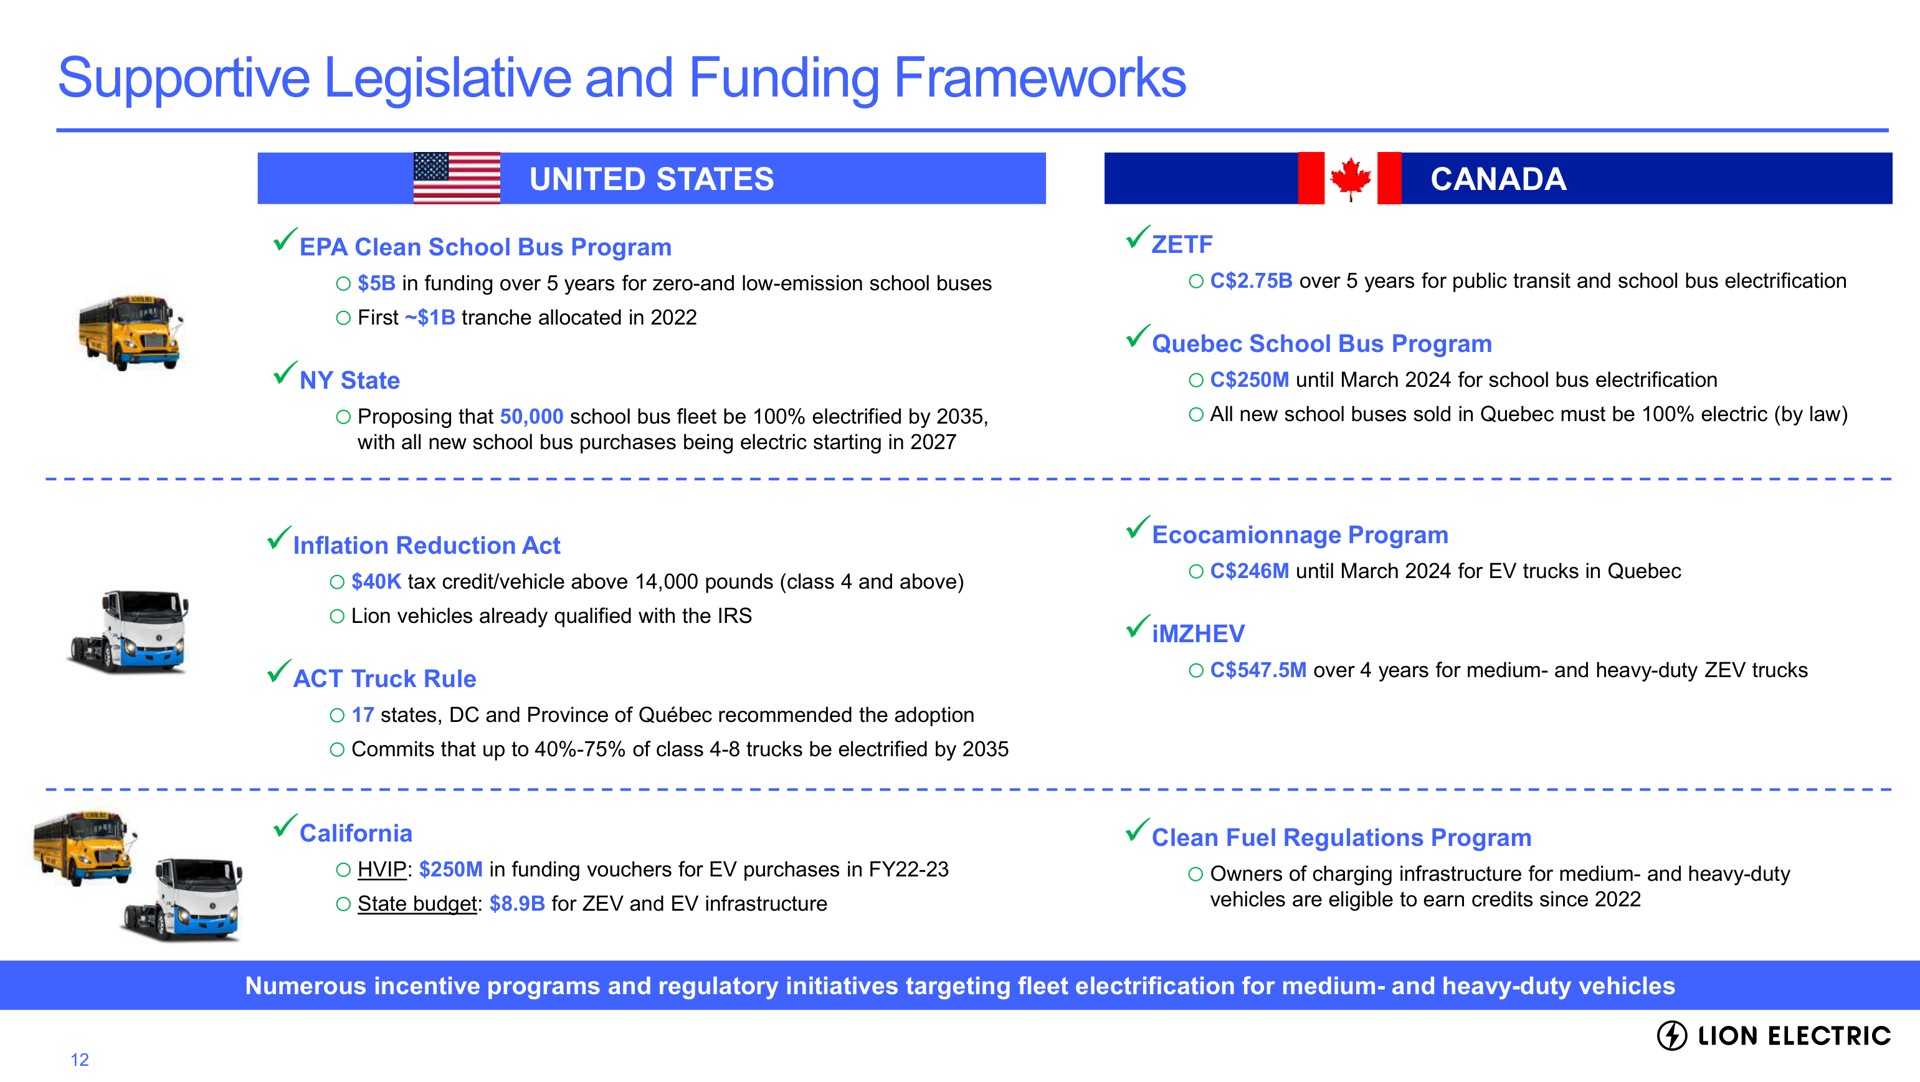 supportive legislative and funding frameworks united states canada | Lion Electric